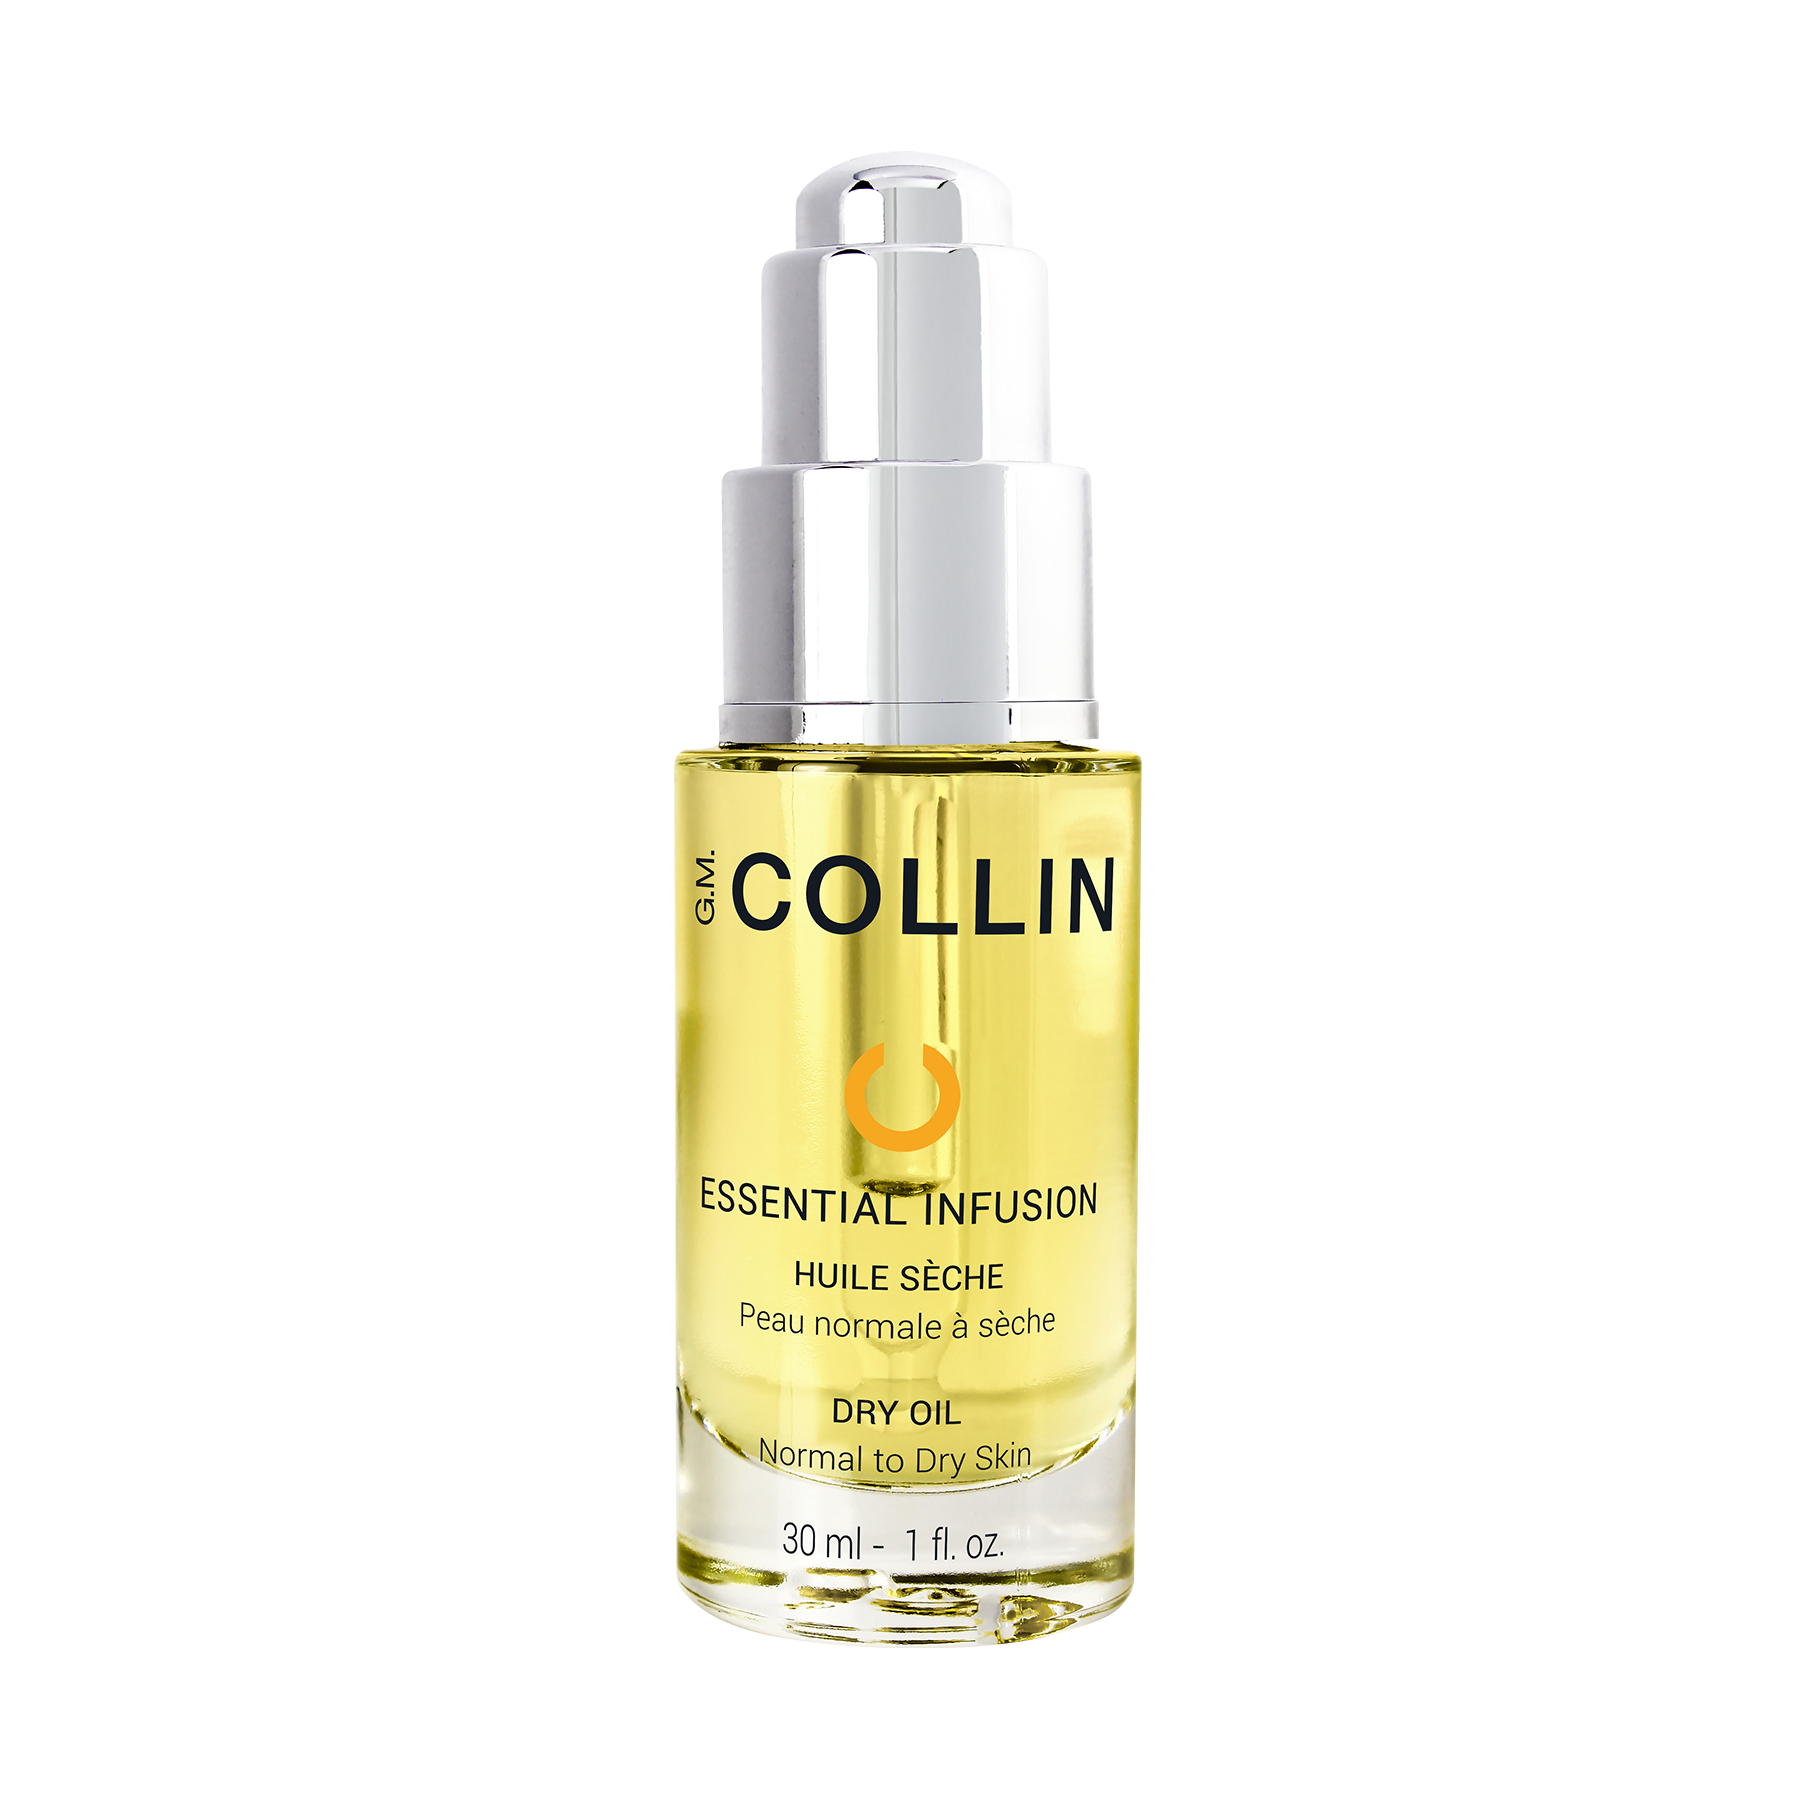 Essential infusion dry oil